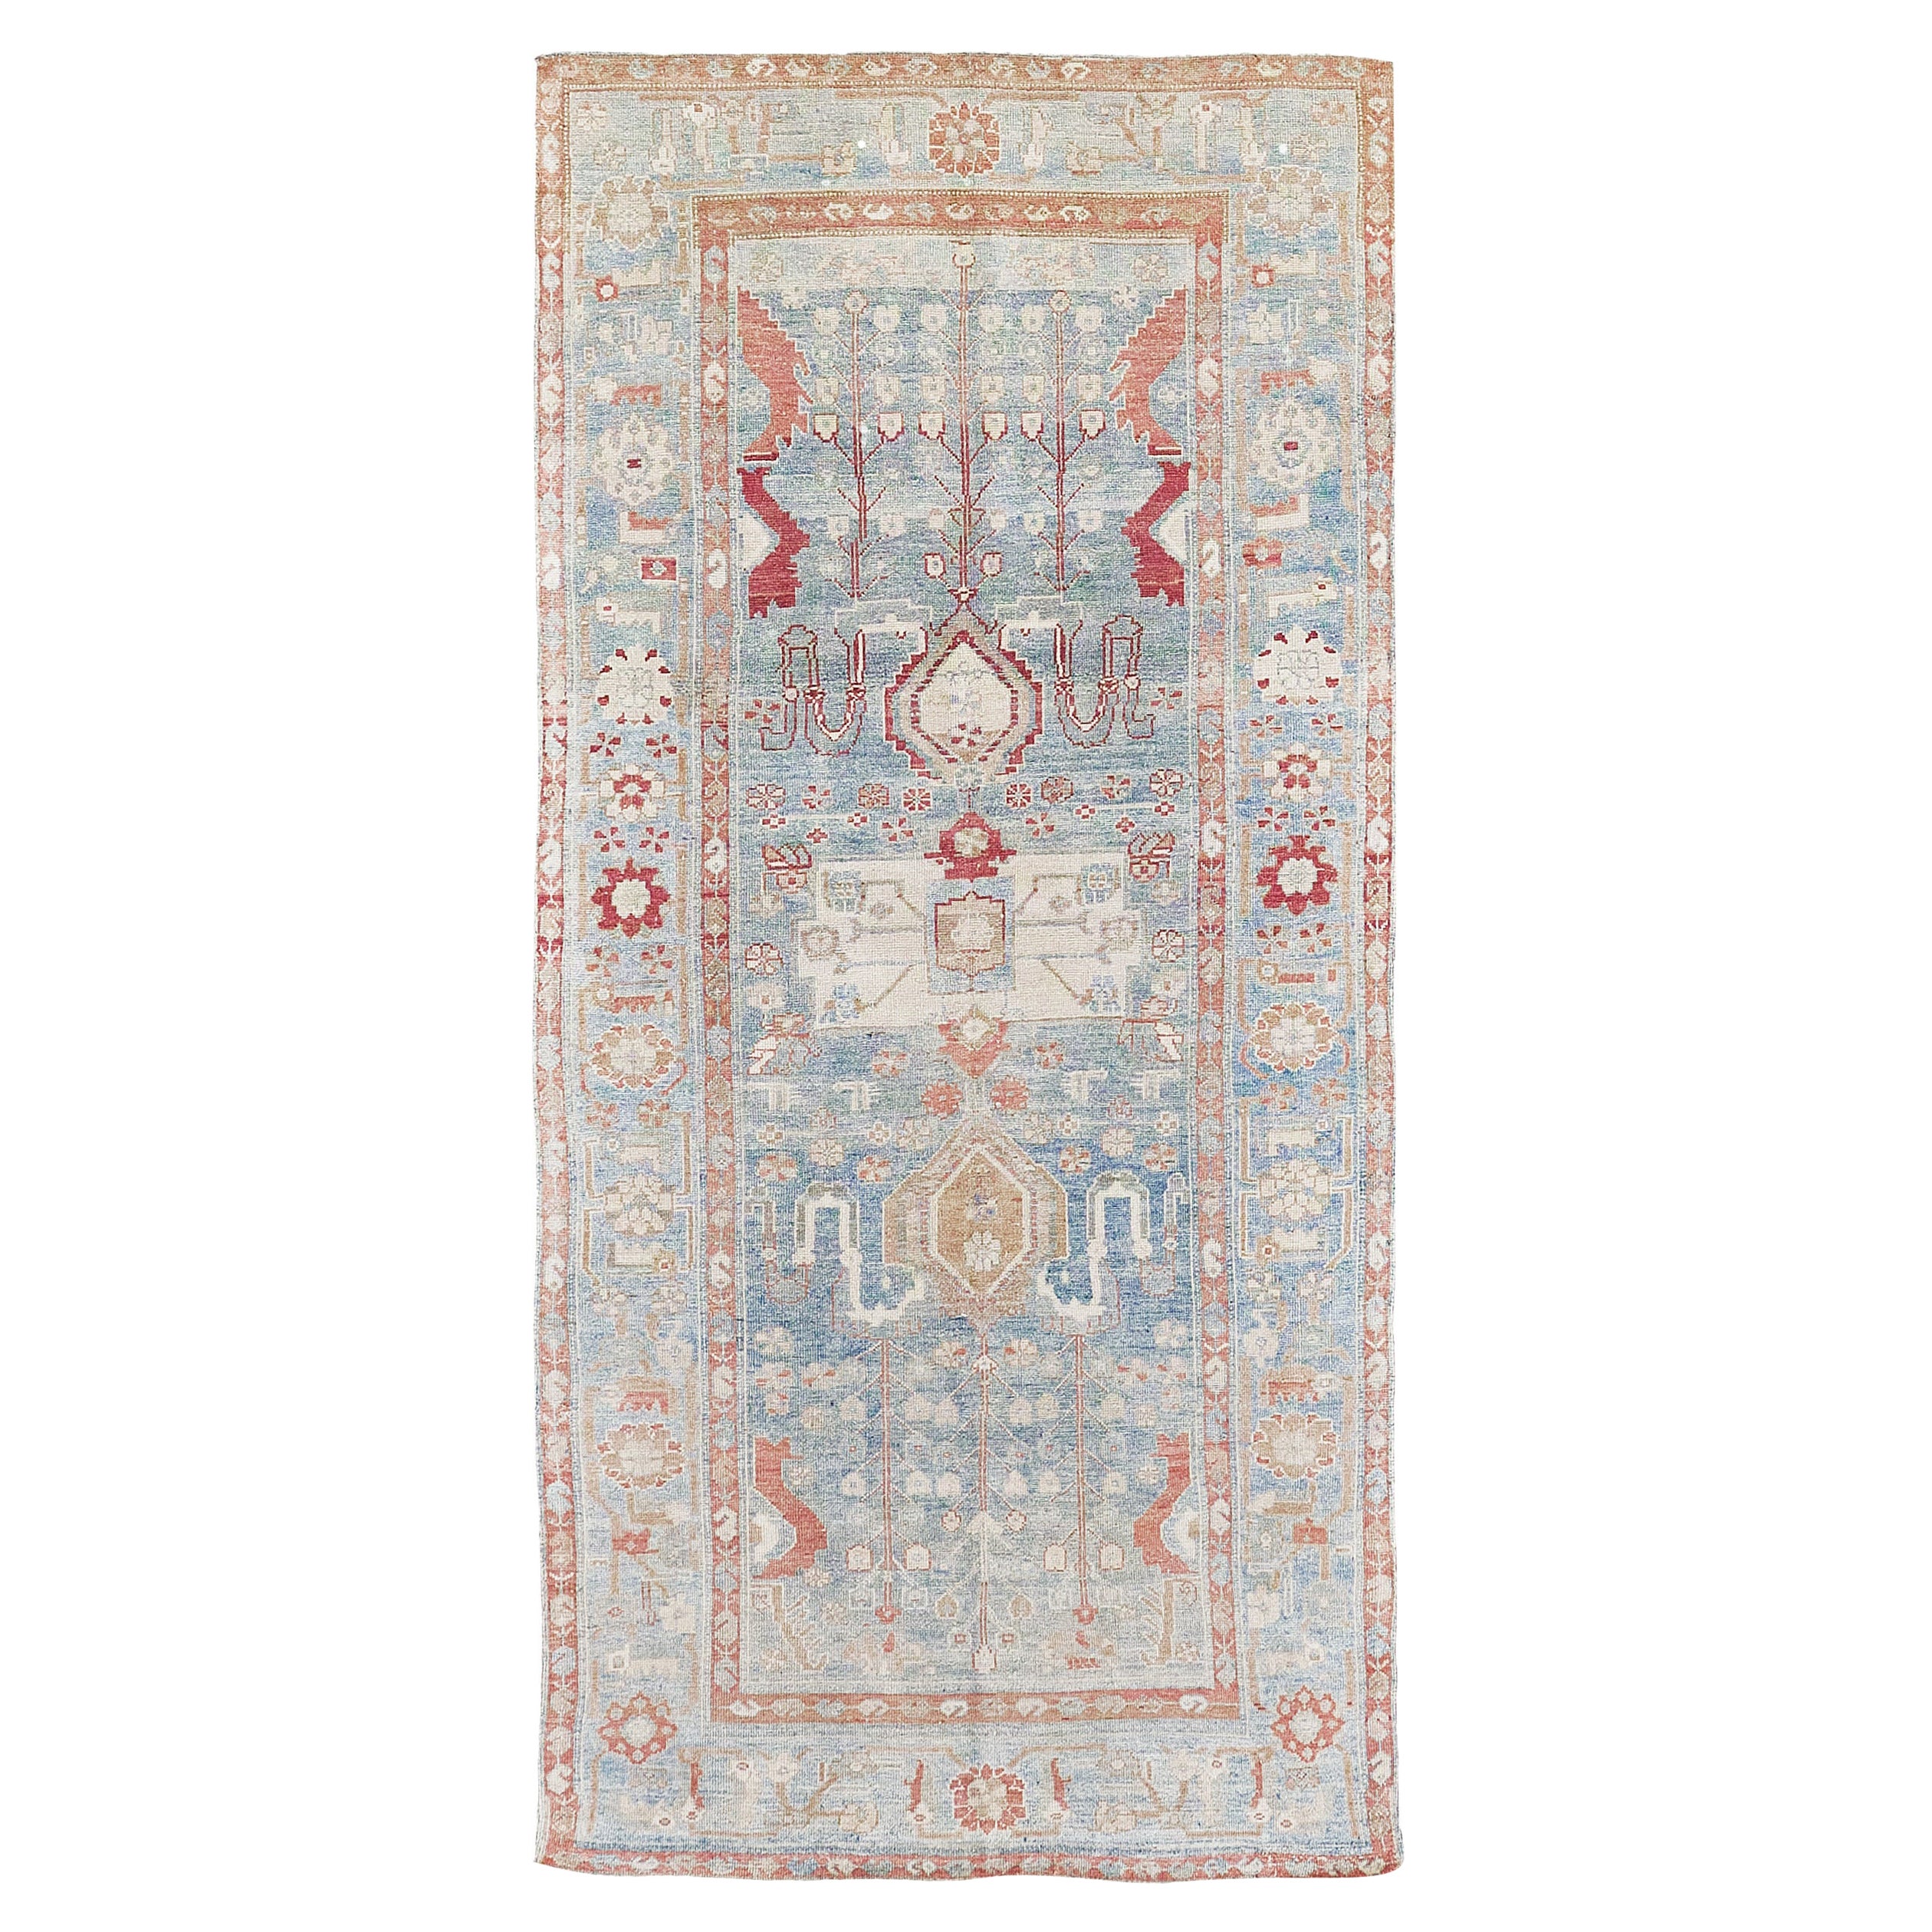 Antique Persian Malayer Runner 26807 For Sale